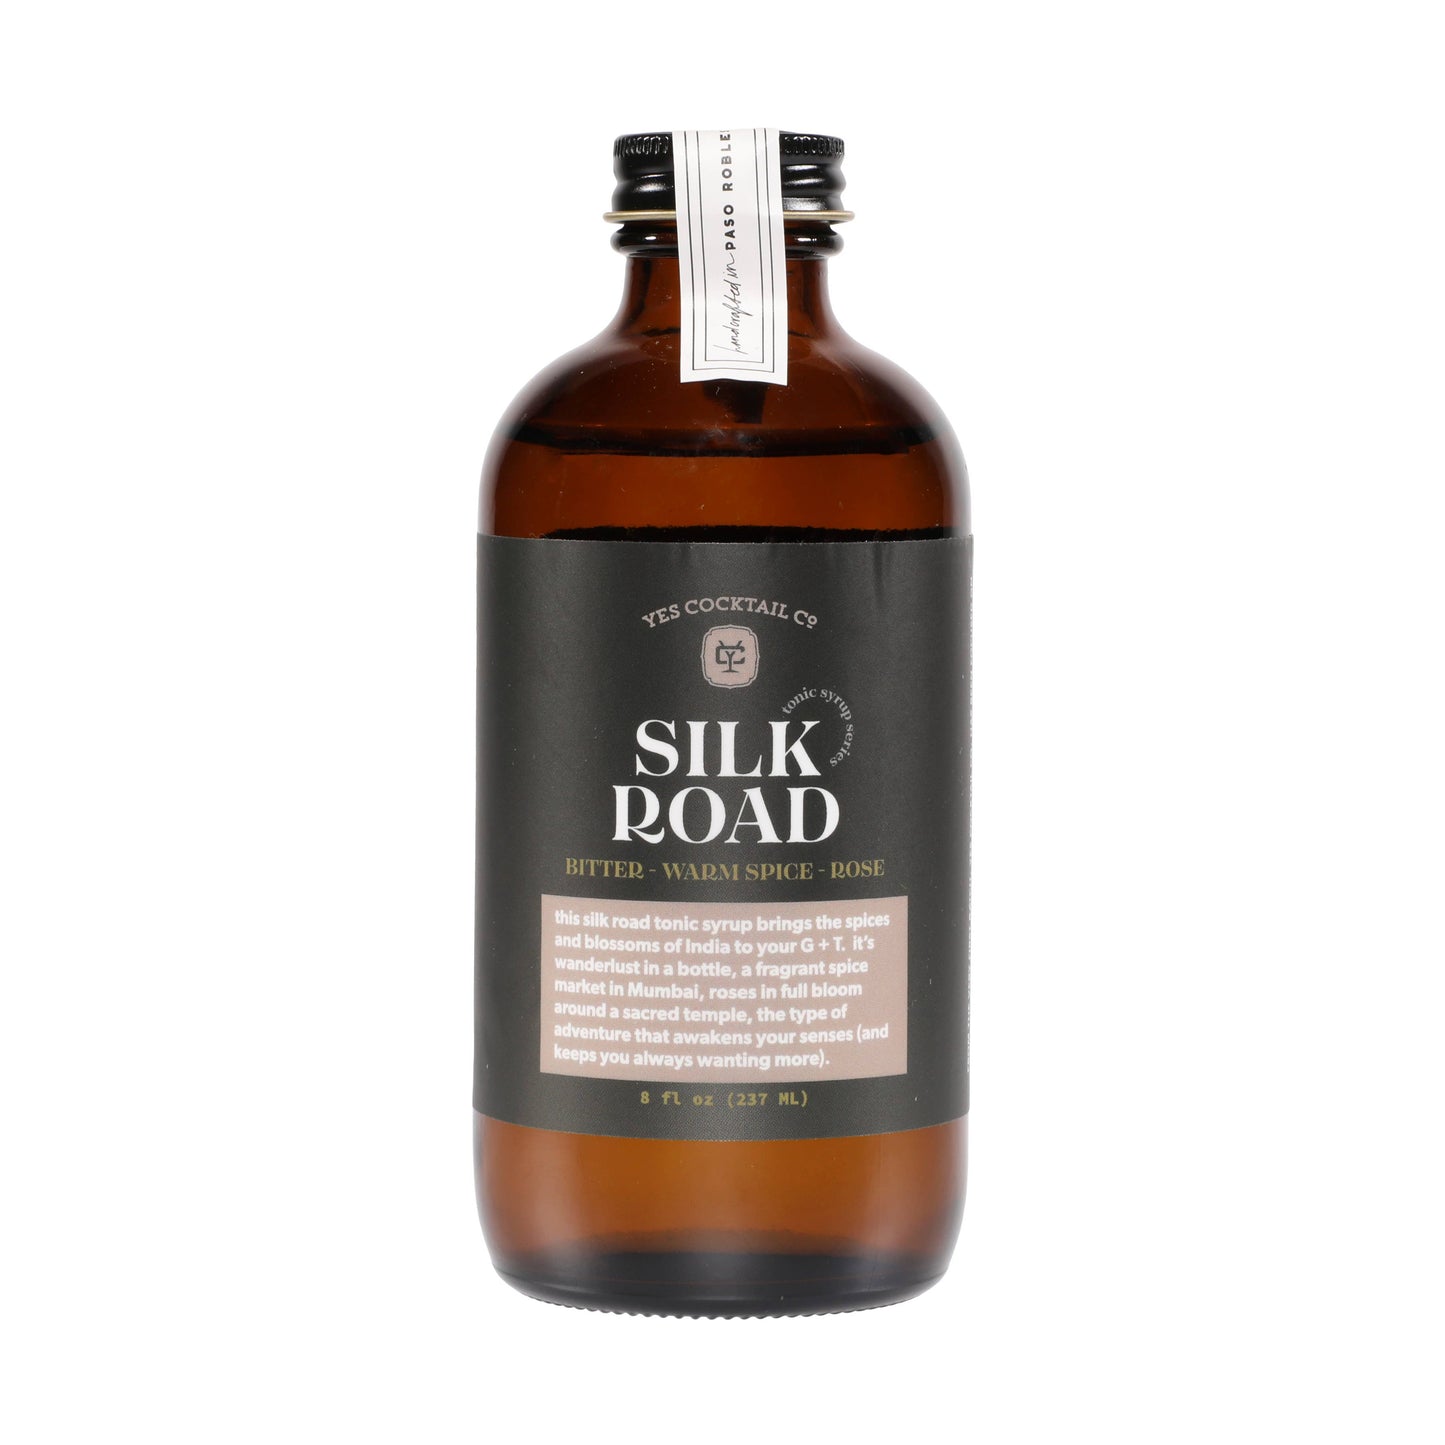 Silk Road Tonic Syrup